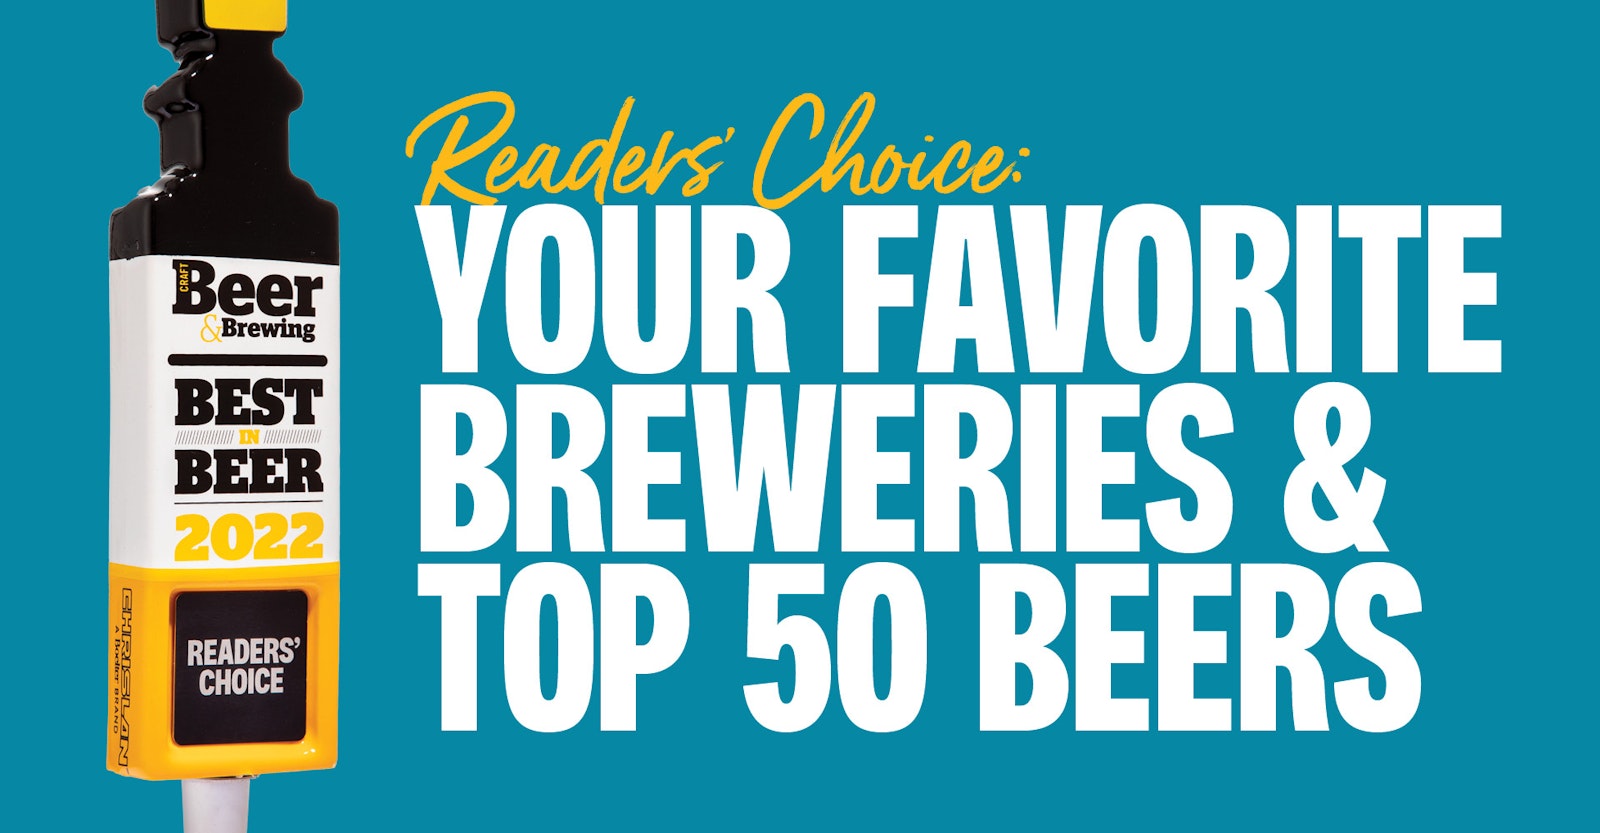 omhyggelig Selskabelig morbiditet Best in Beer 2022: Reader's Choice Top 50 & Your Favorite Breweries by Size  | Craft Beer & Brewing